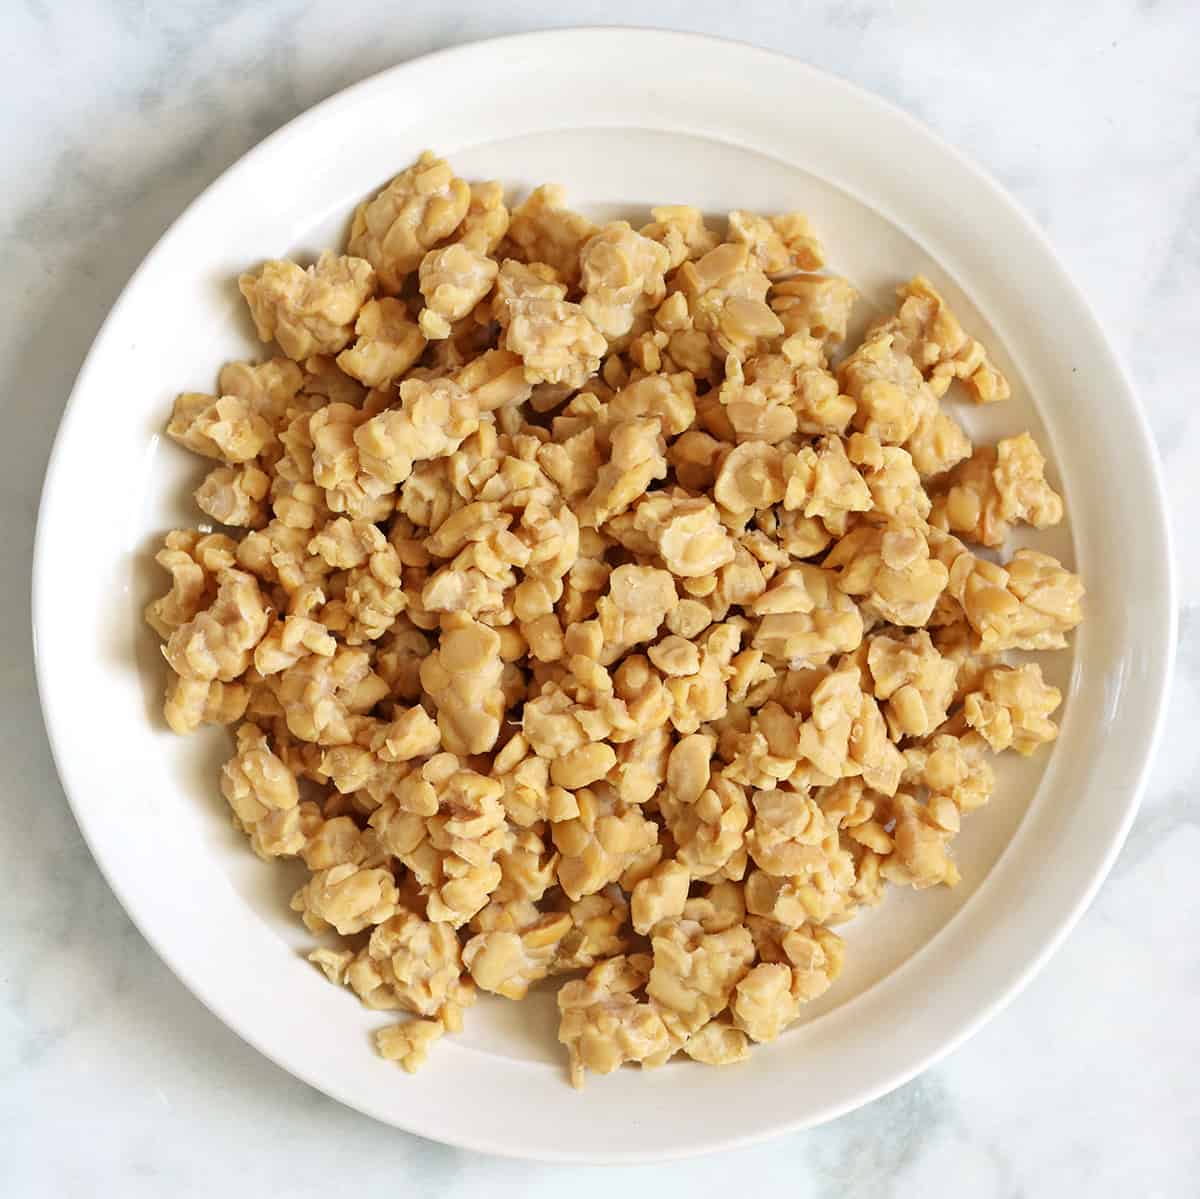 crumbled tempeh in a white bowl.